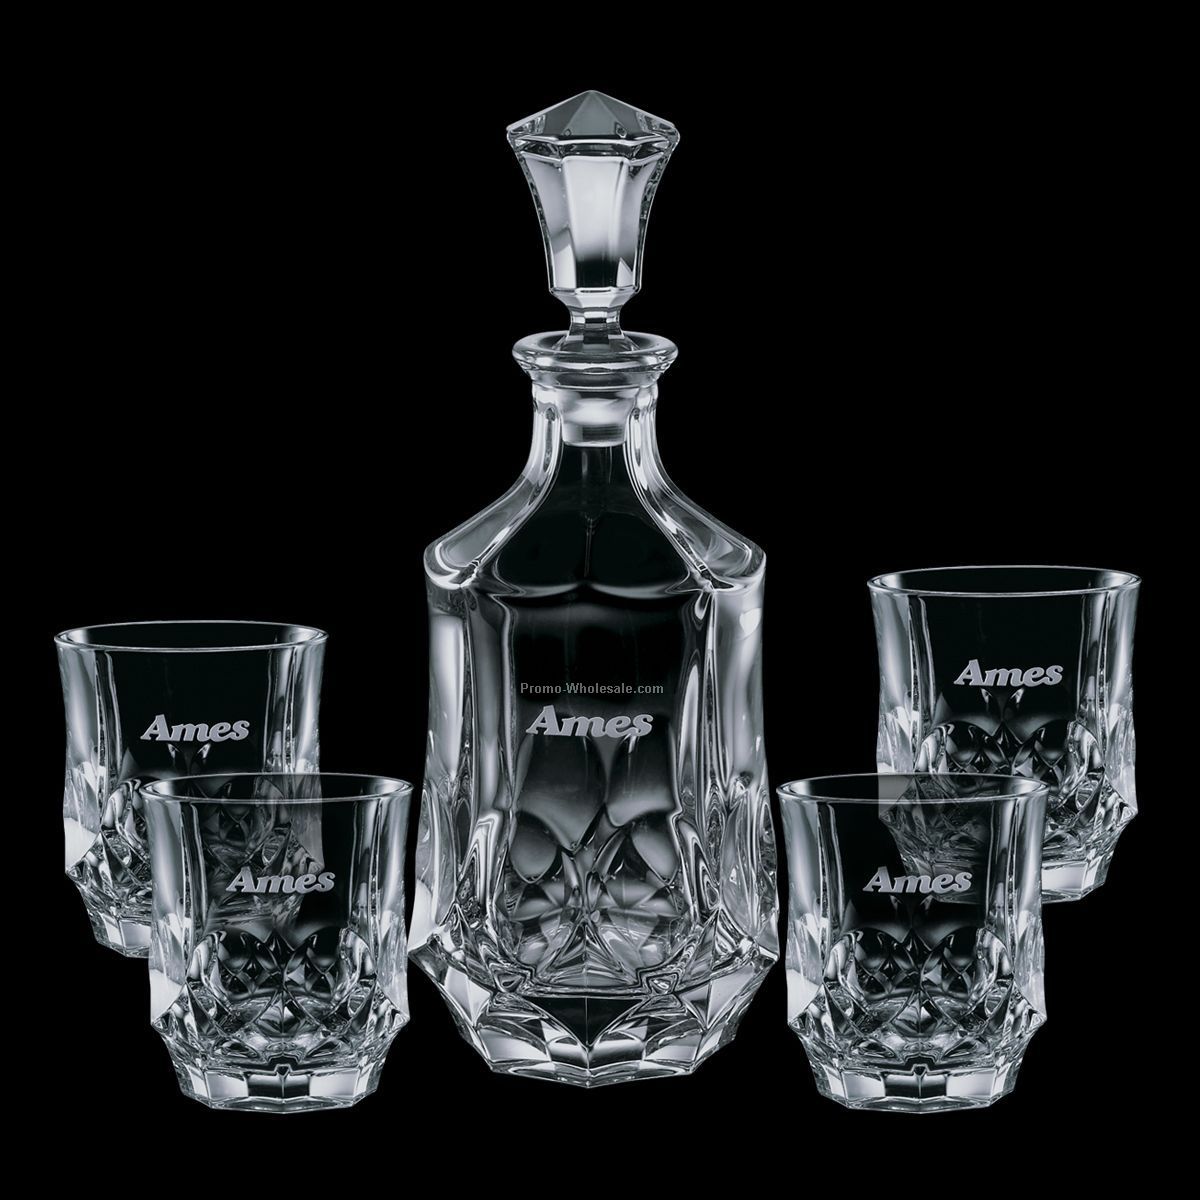 25 Oz. Foxborough Crystal Decanter And 4 On-the-rocks Glasses